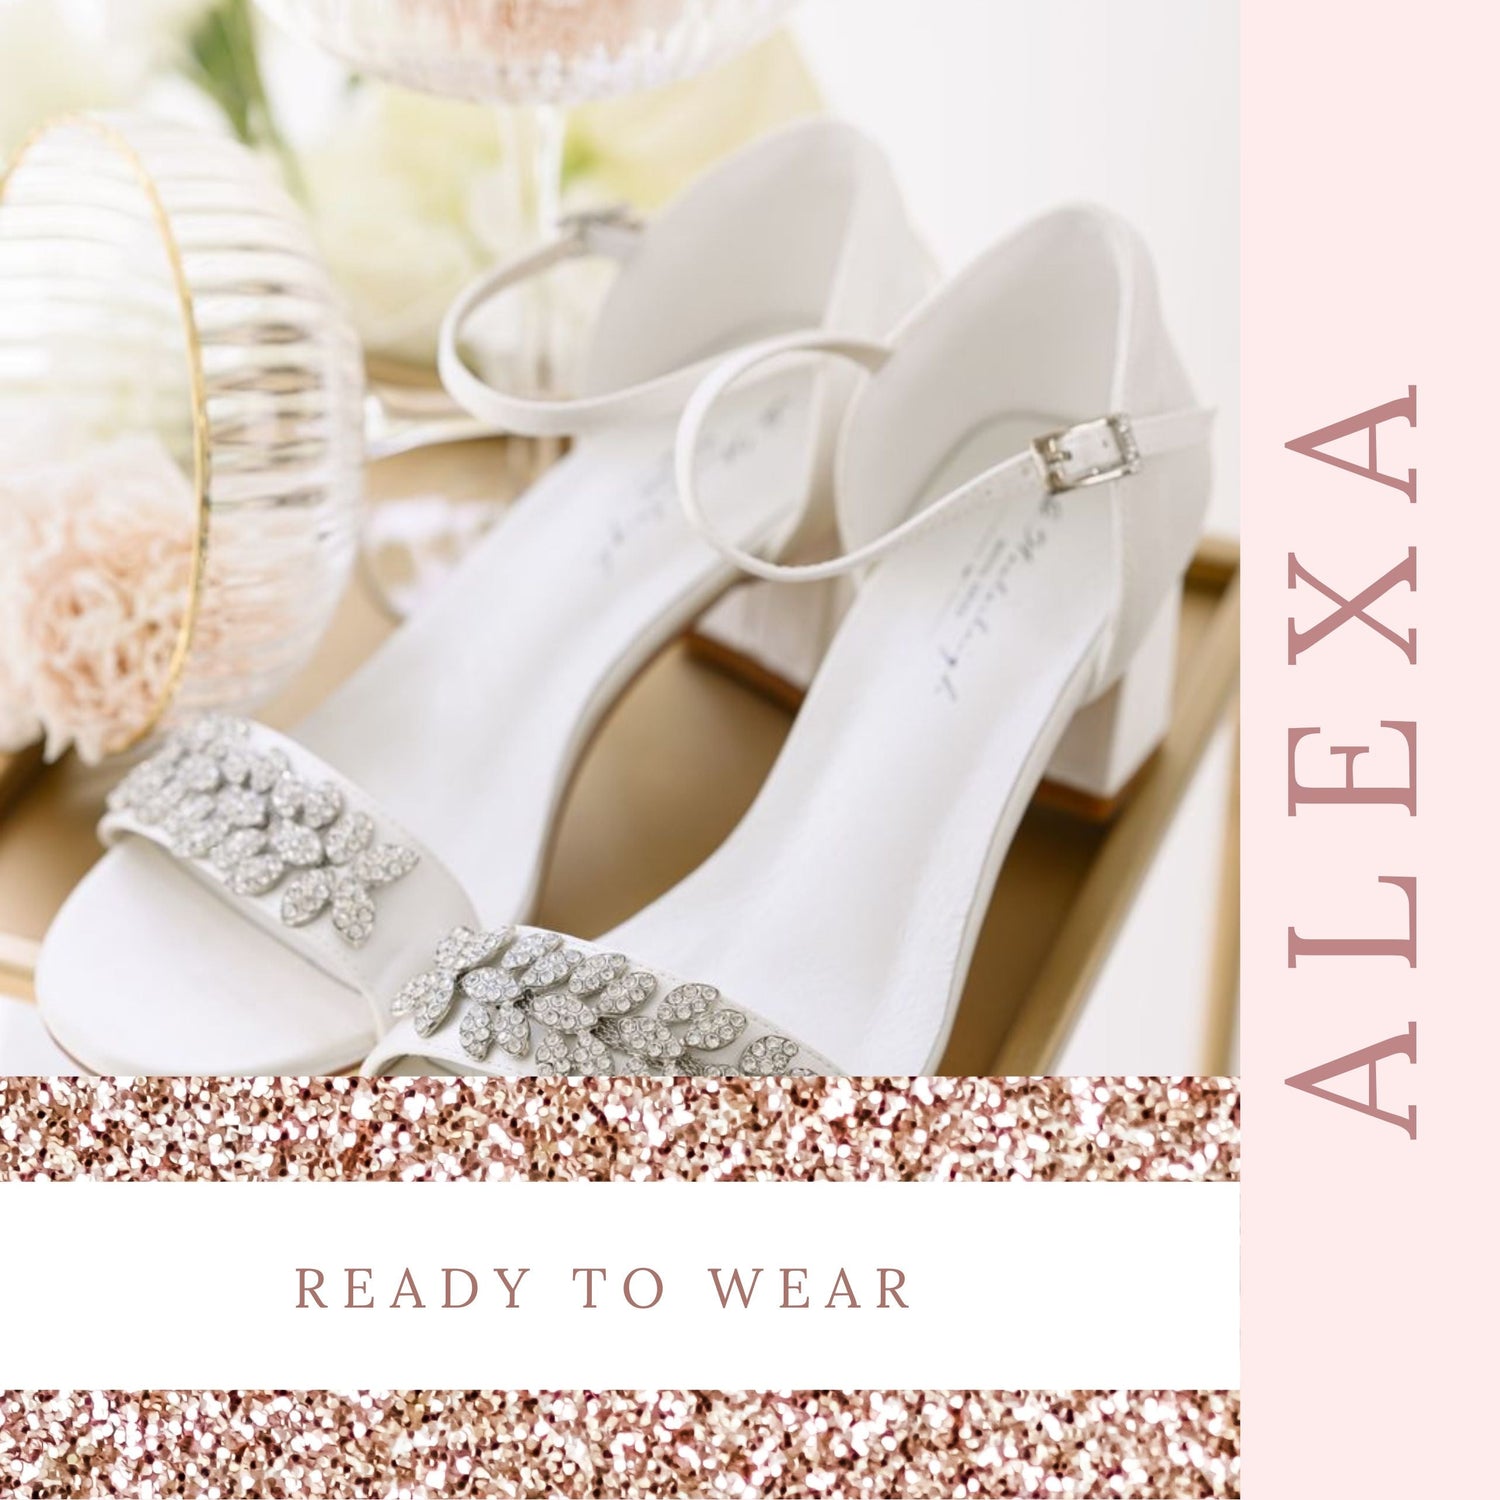 Crochet Lace Block Heel Sandals with Small Pearl Applique - Women Shoes, Bridal  shoes, Bridesmaid shoes